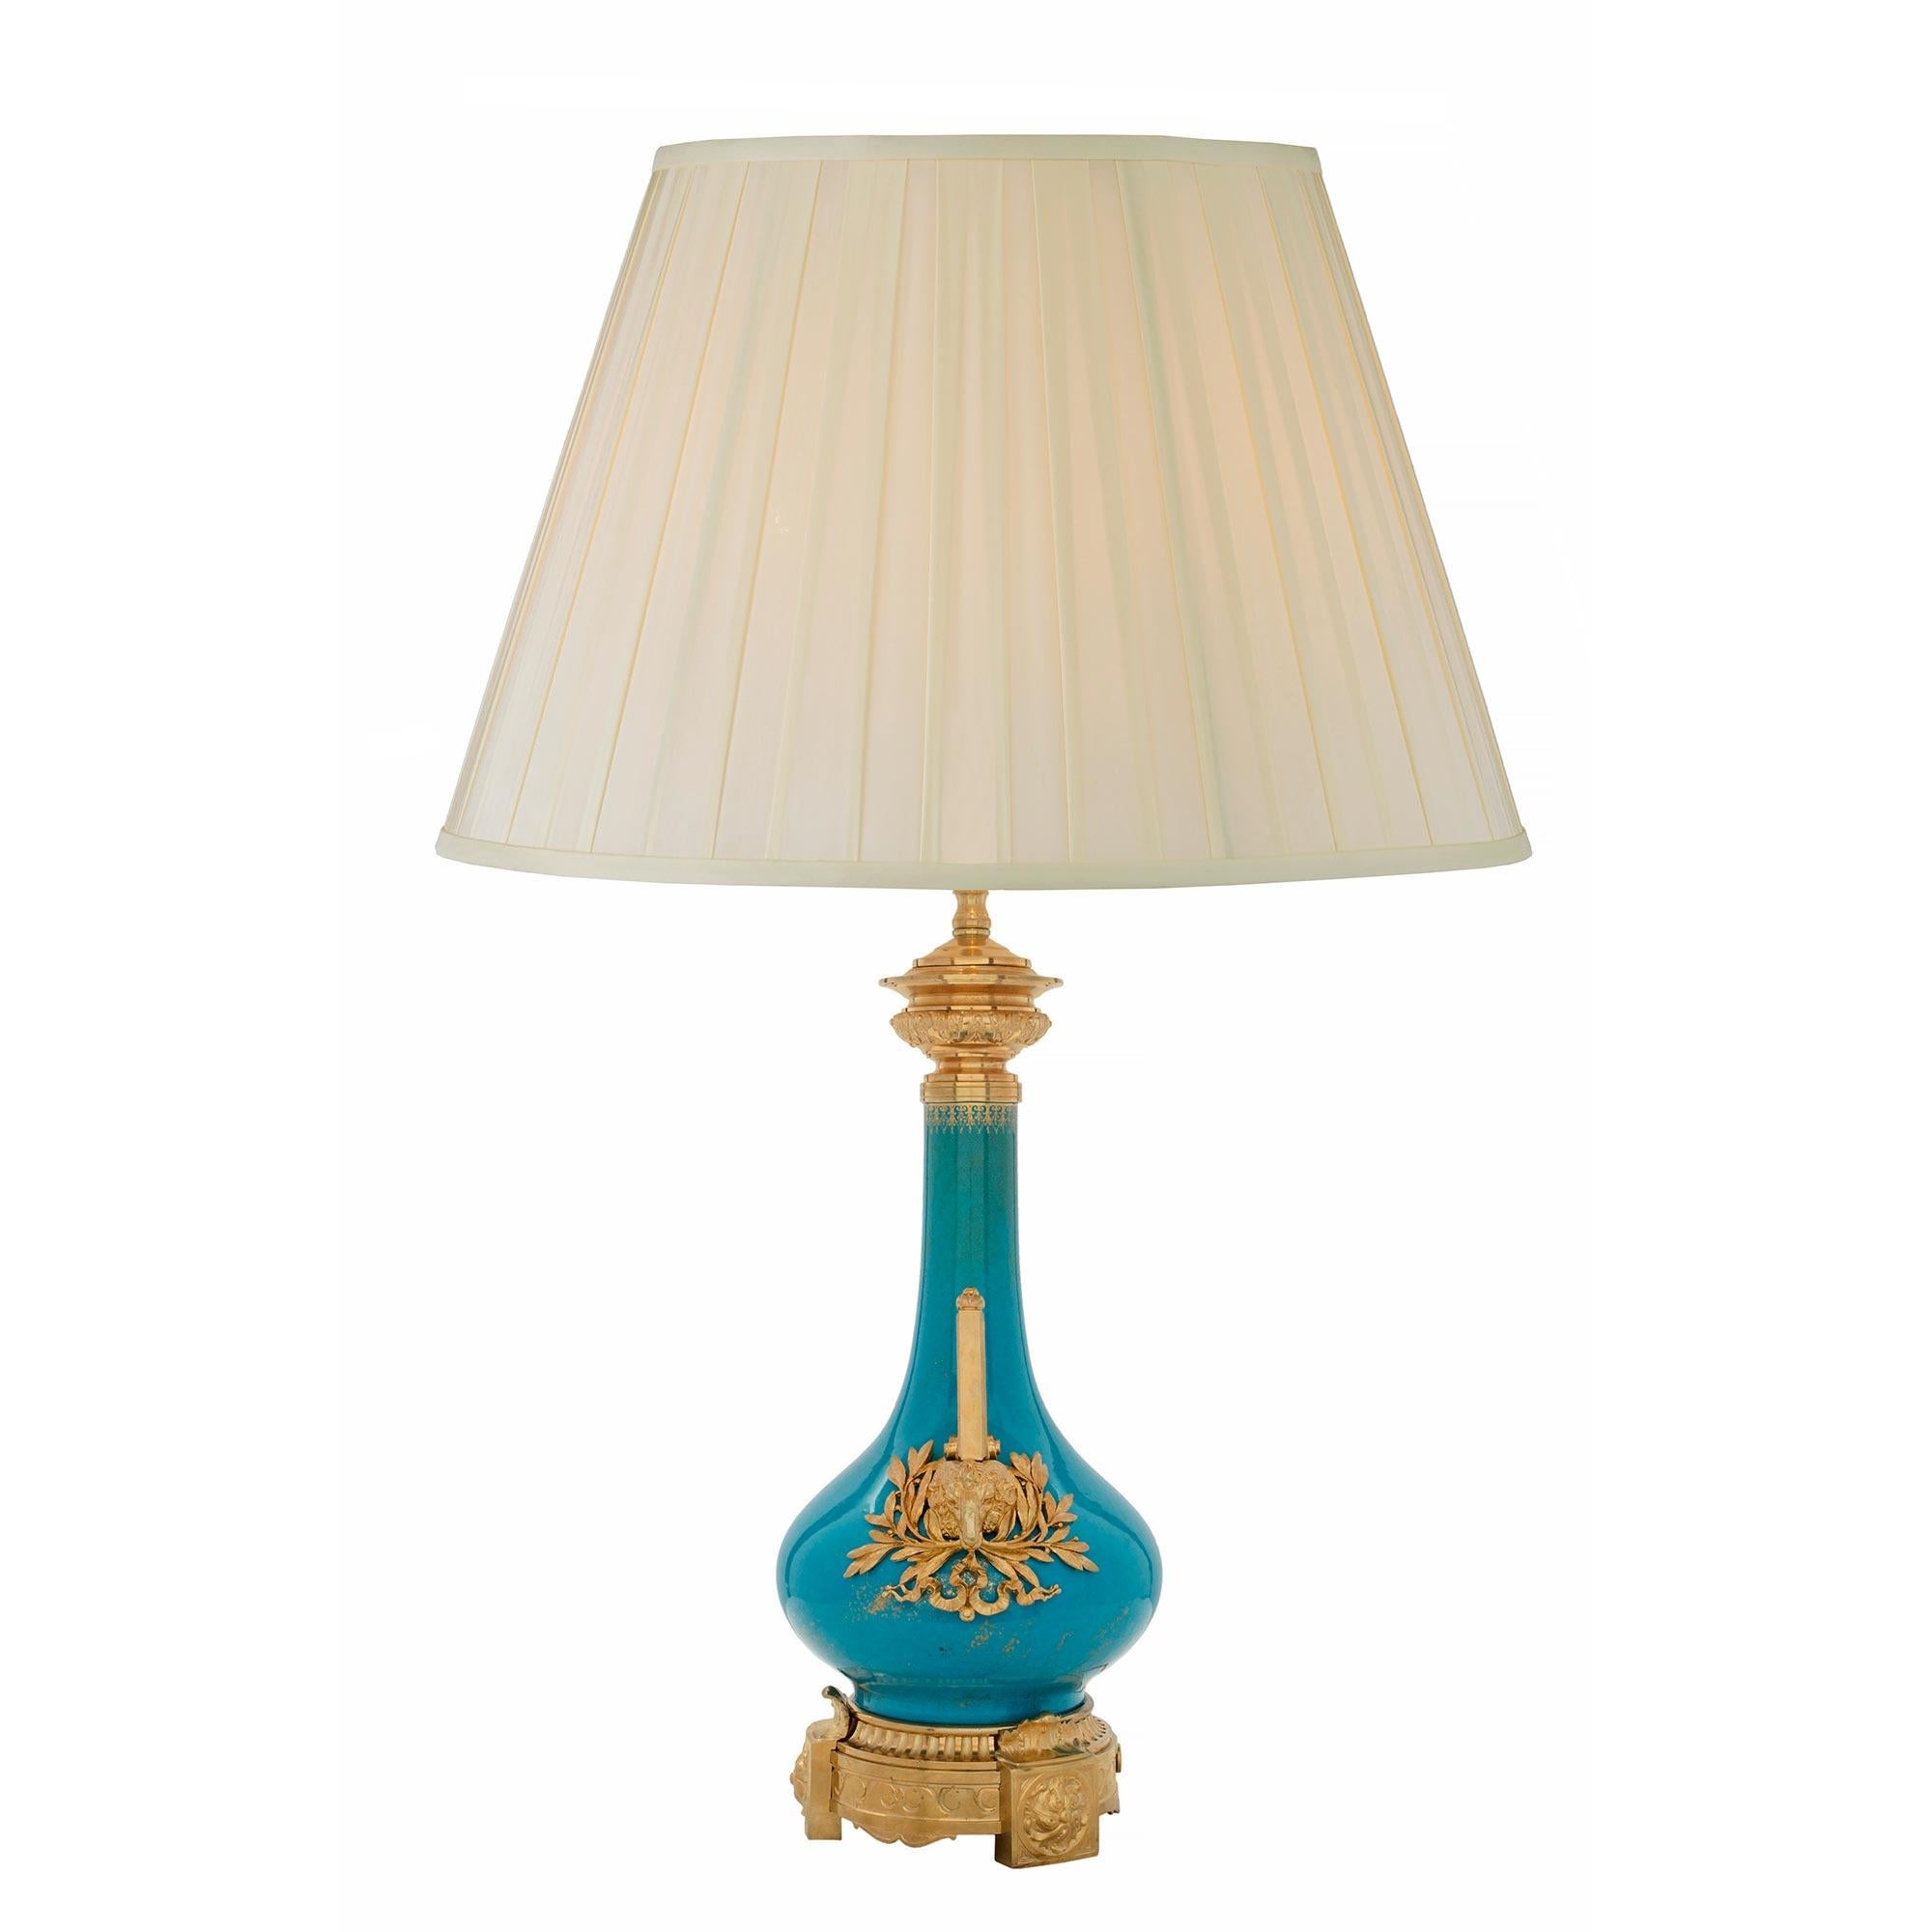 French 19th Century Louis XVI St. Porcelain and Ormolu Lamp In Good Condition For Sale In West Palm Beach, FL